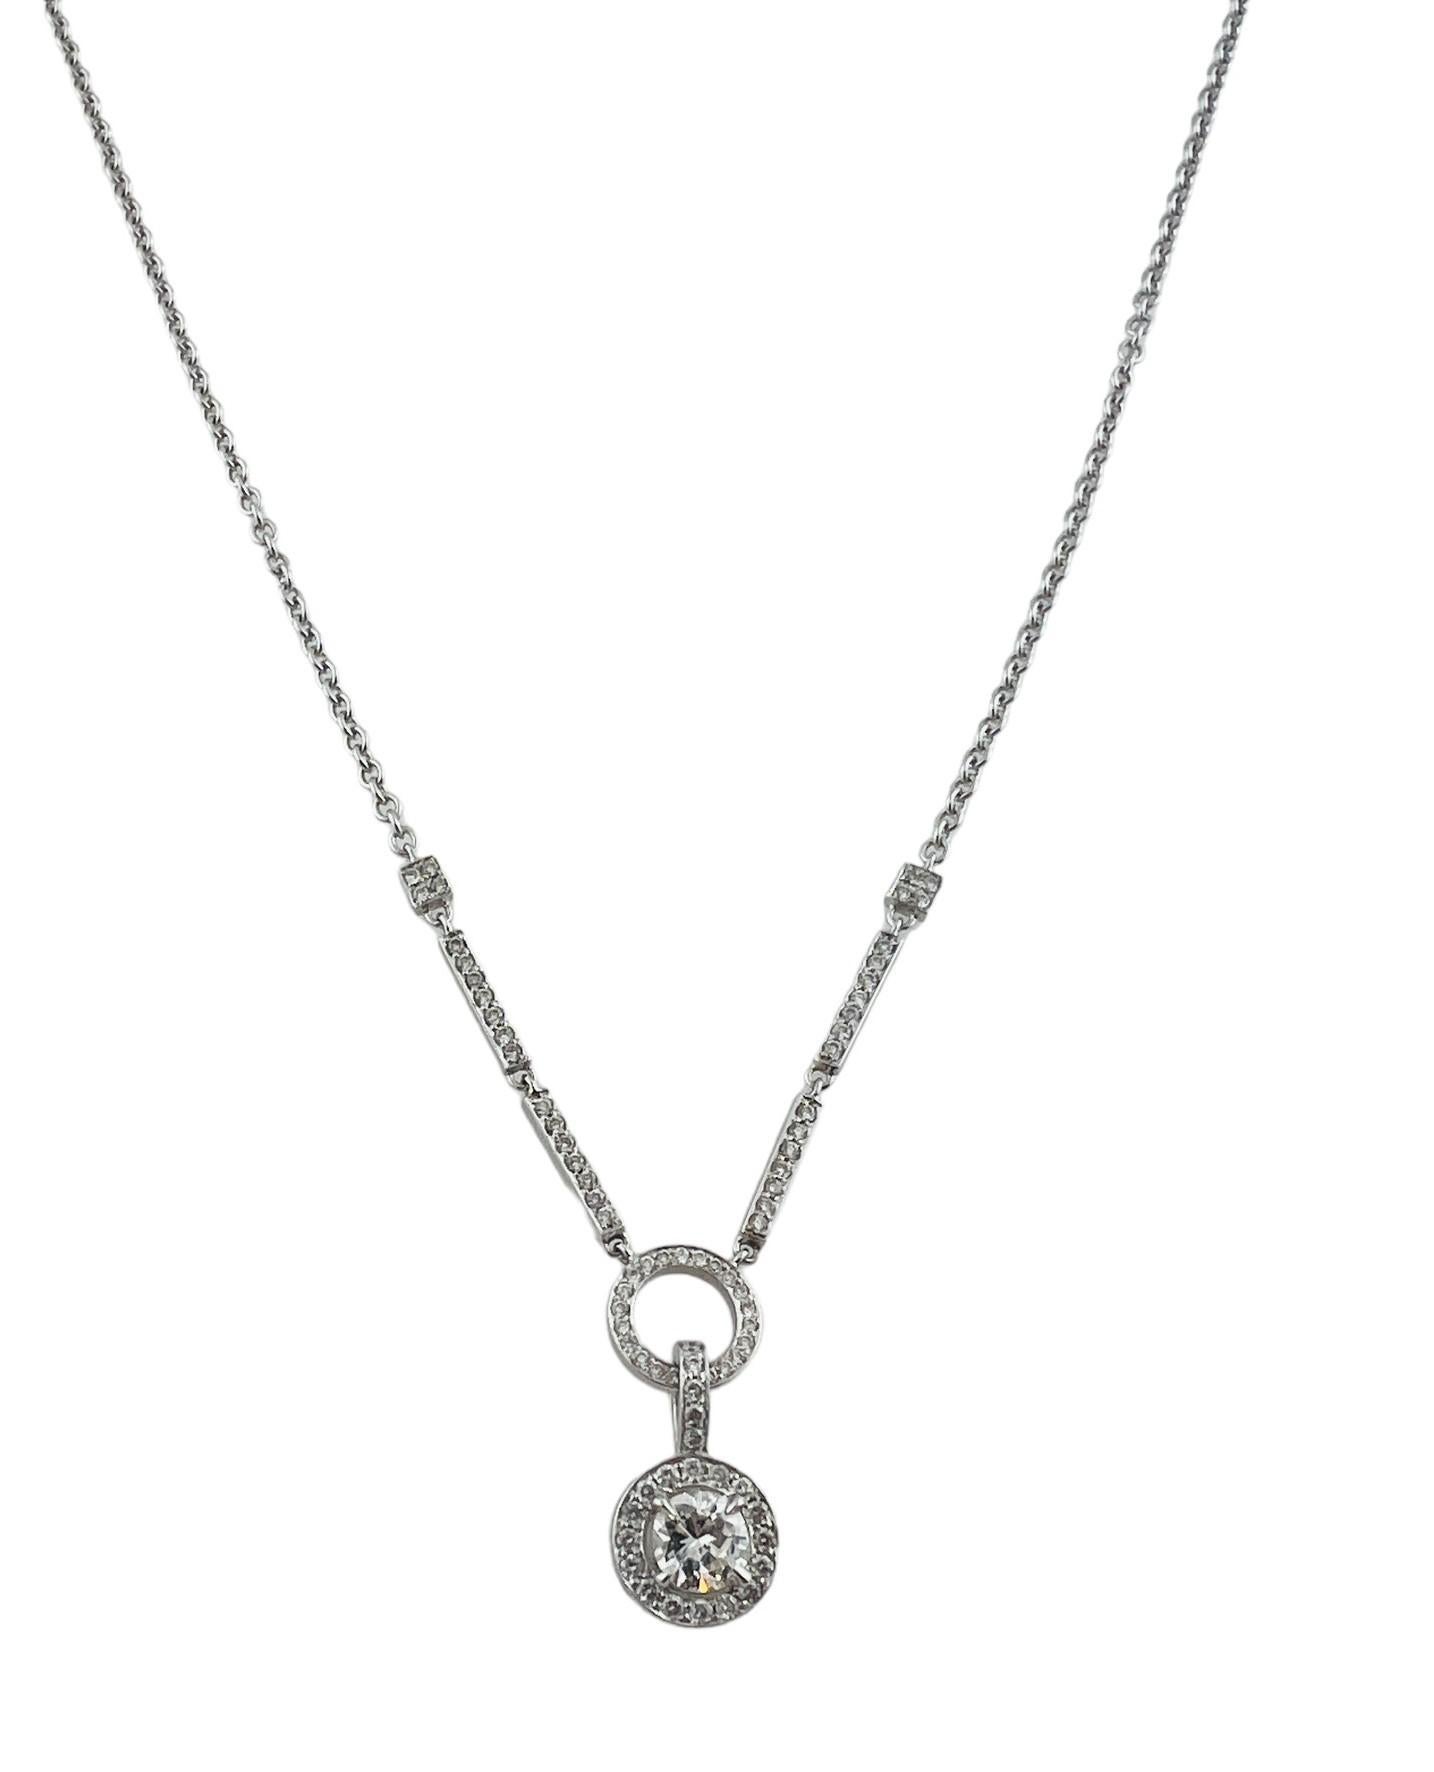 This sparkling pendant necklace features 79 round brilliant cut diamonds (center: .60 ct.) set in classic 14K white gold.

Total diamond weight:   .97 ct.

Diamond color:  G-H

Diamond clarity:  SI1-I1

Size:  17 inches (necklace)

21 mm x 9 mm